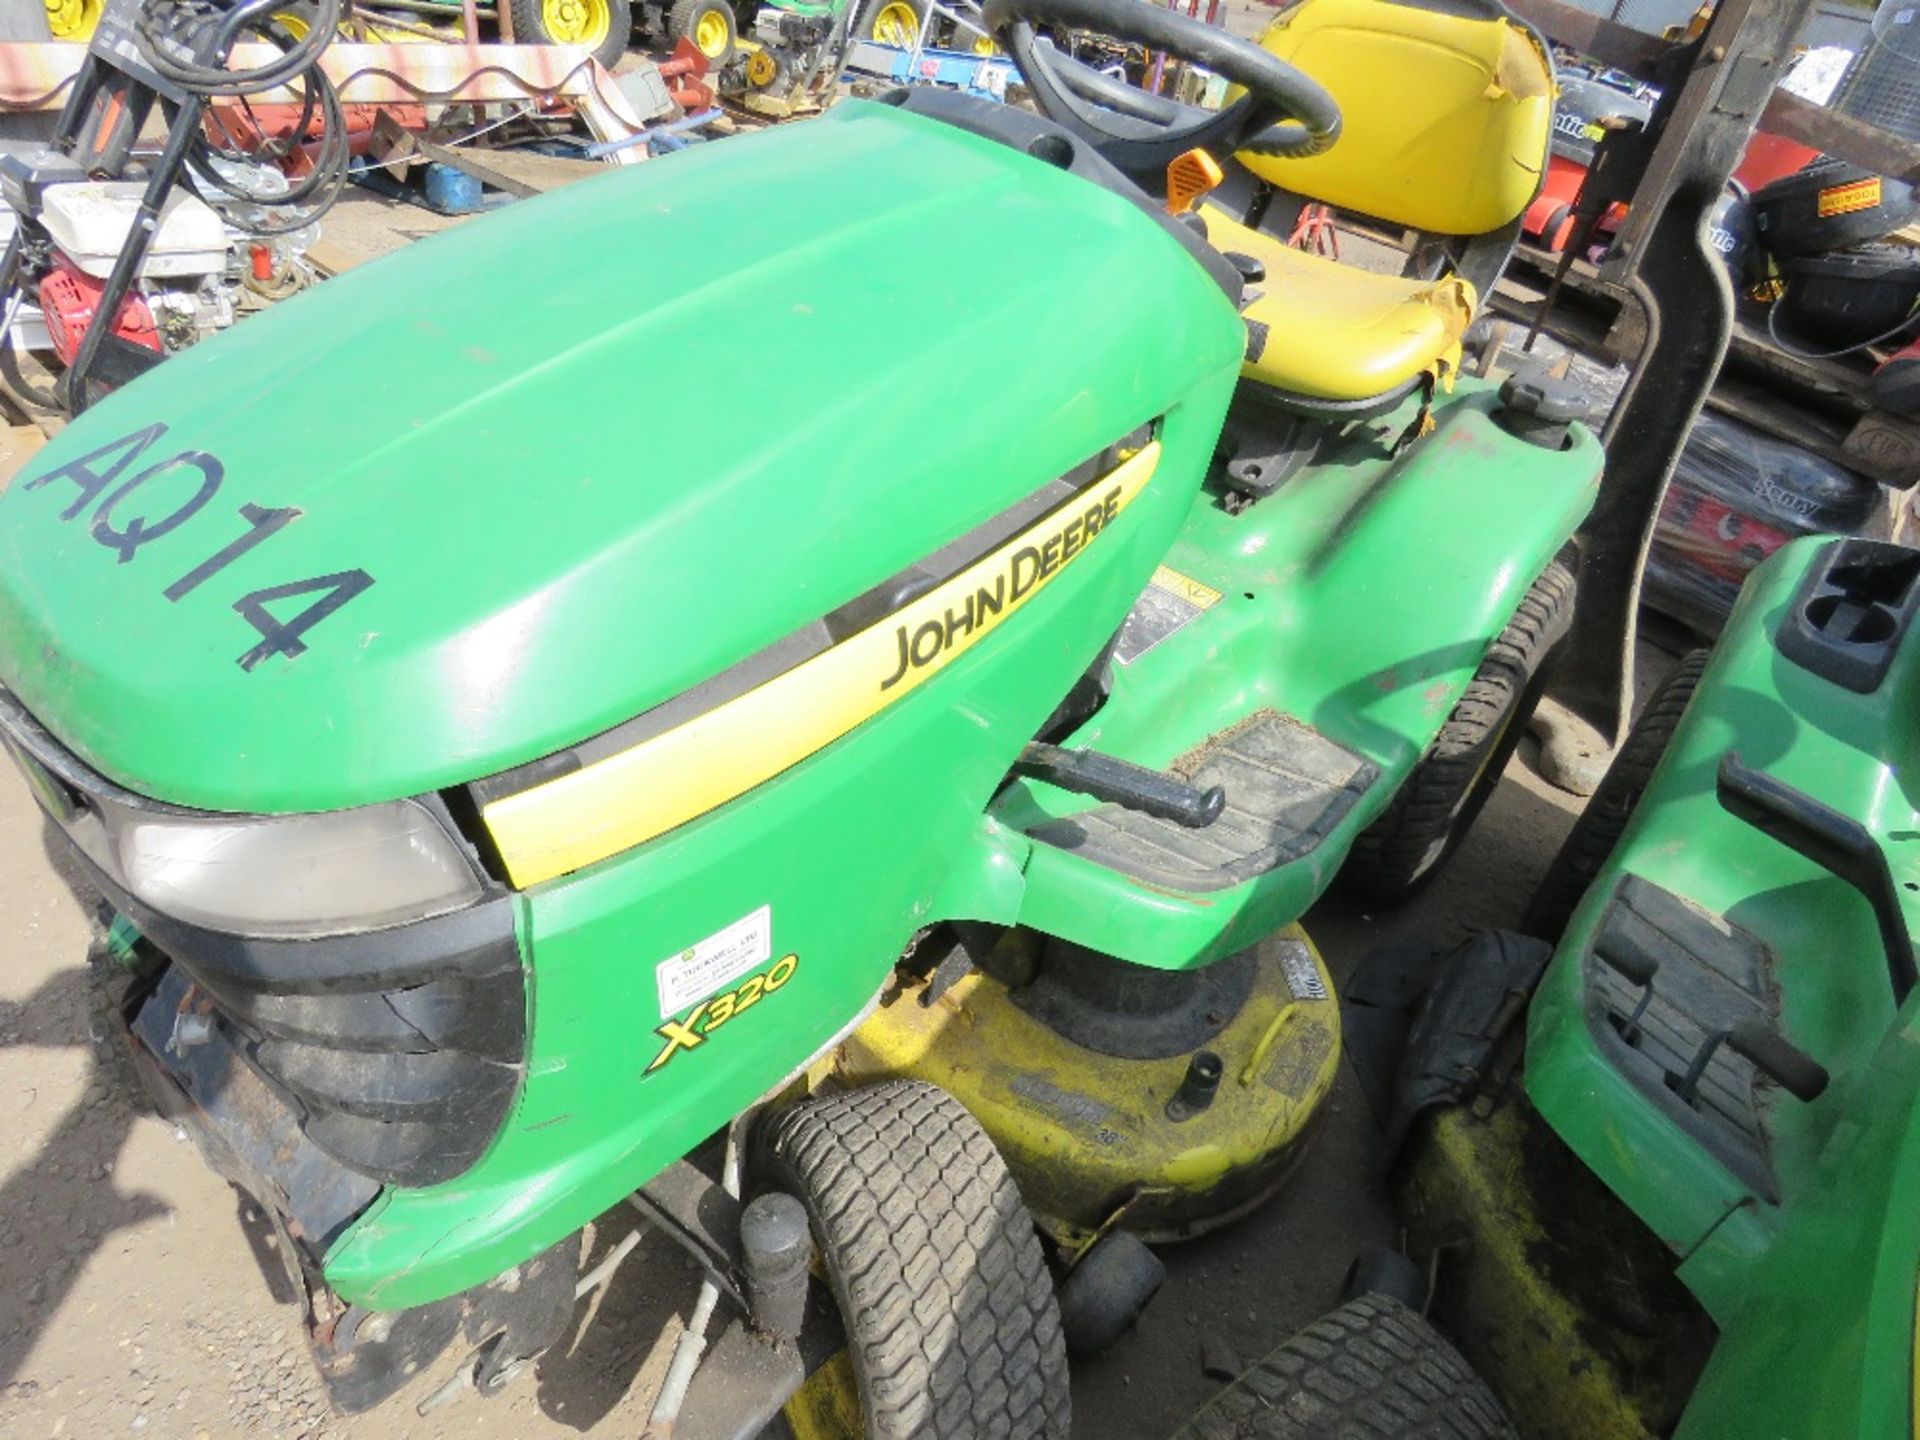 JOHN DEERE X320 PROFESSIONAL RIDE ON PETROL MOWER. PREVIOUS COUNCIL USEAGE. STRAIGHT FROM STORAGE, - Image 2 of 5